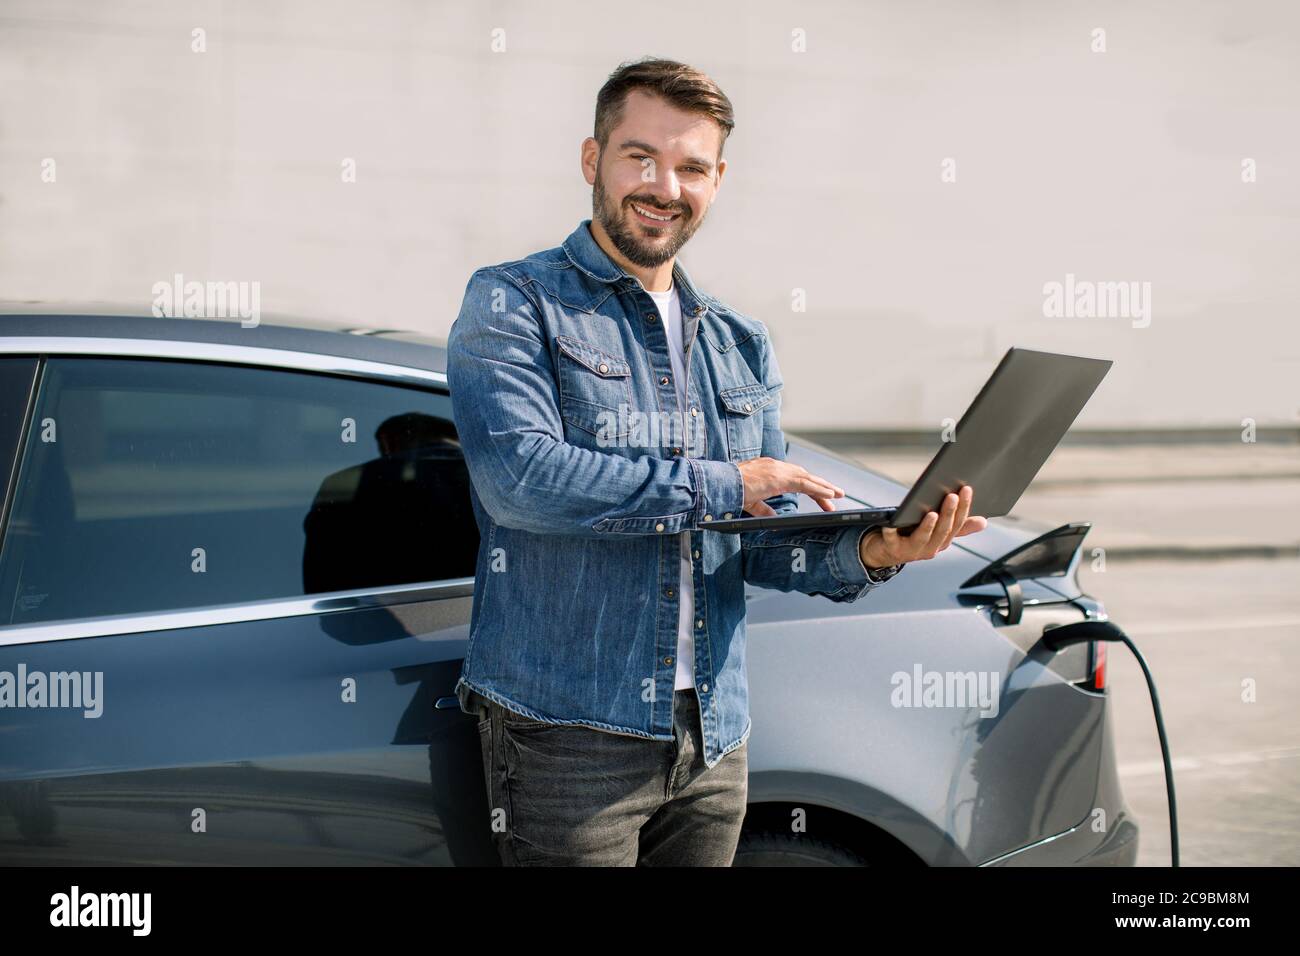 Young handsome smiling man working on laptop, waiting while his luxury electric car is charching, paying for charging, standing near city station with Stock Photo